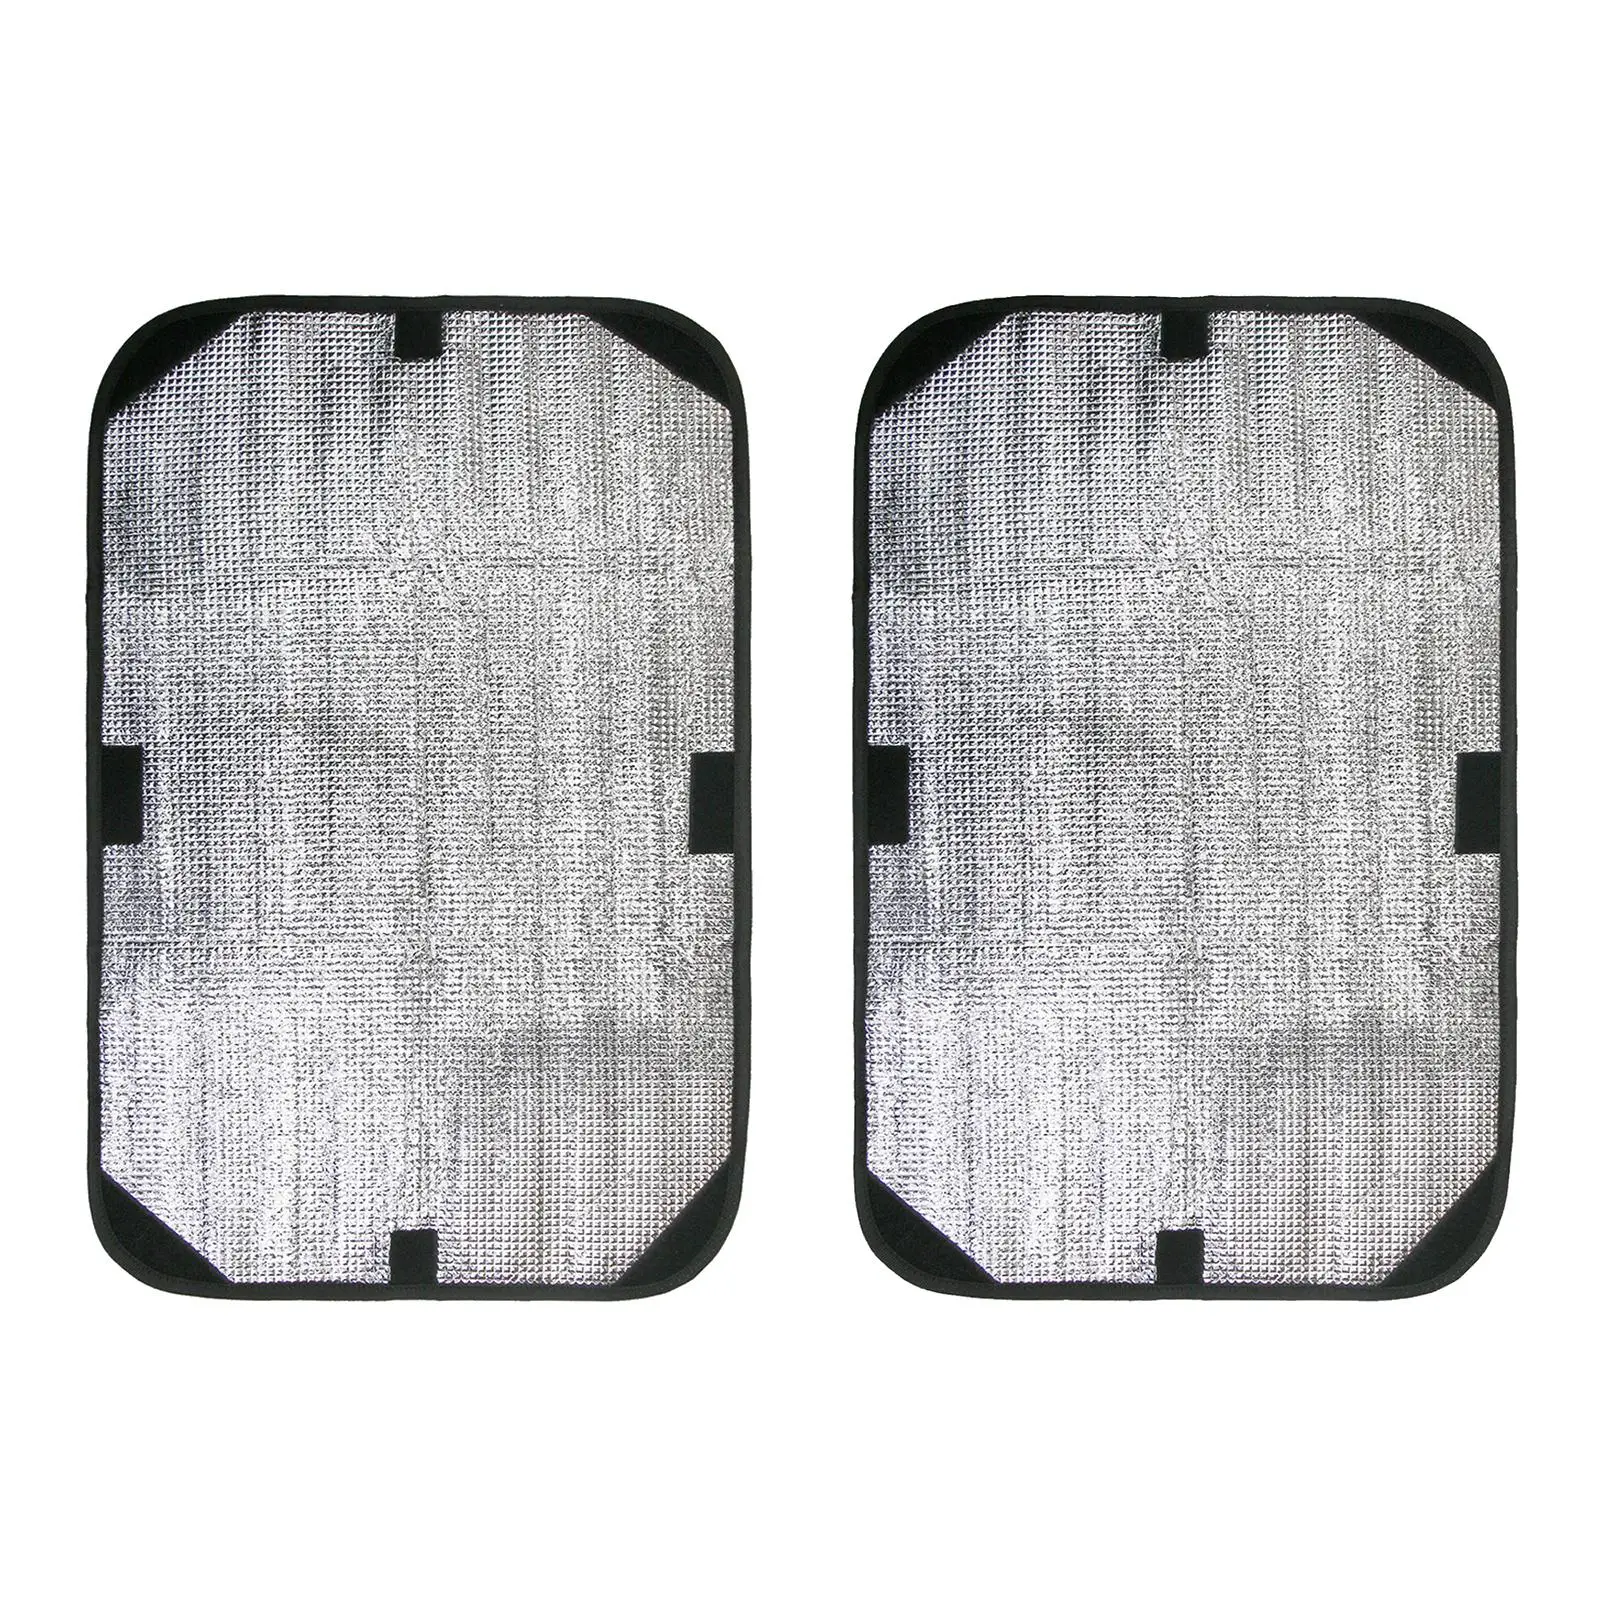 RV Door Window Shade Cover 15.94x24.41inch Sunshield Window Cover for Regulating Temperature